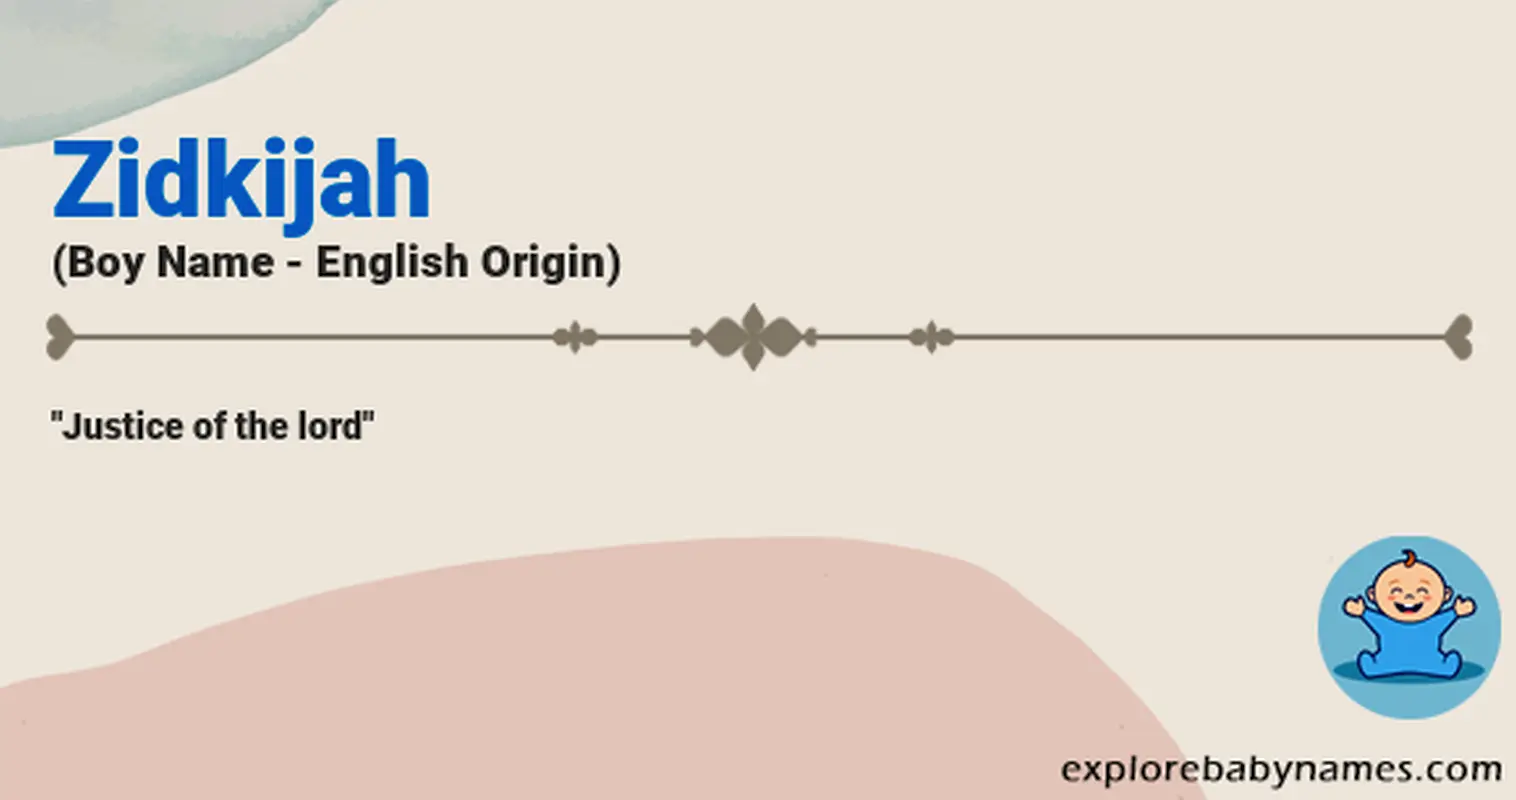 Meaning of Zidkijah